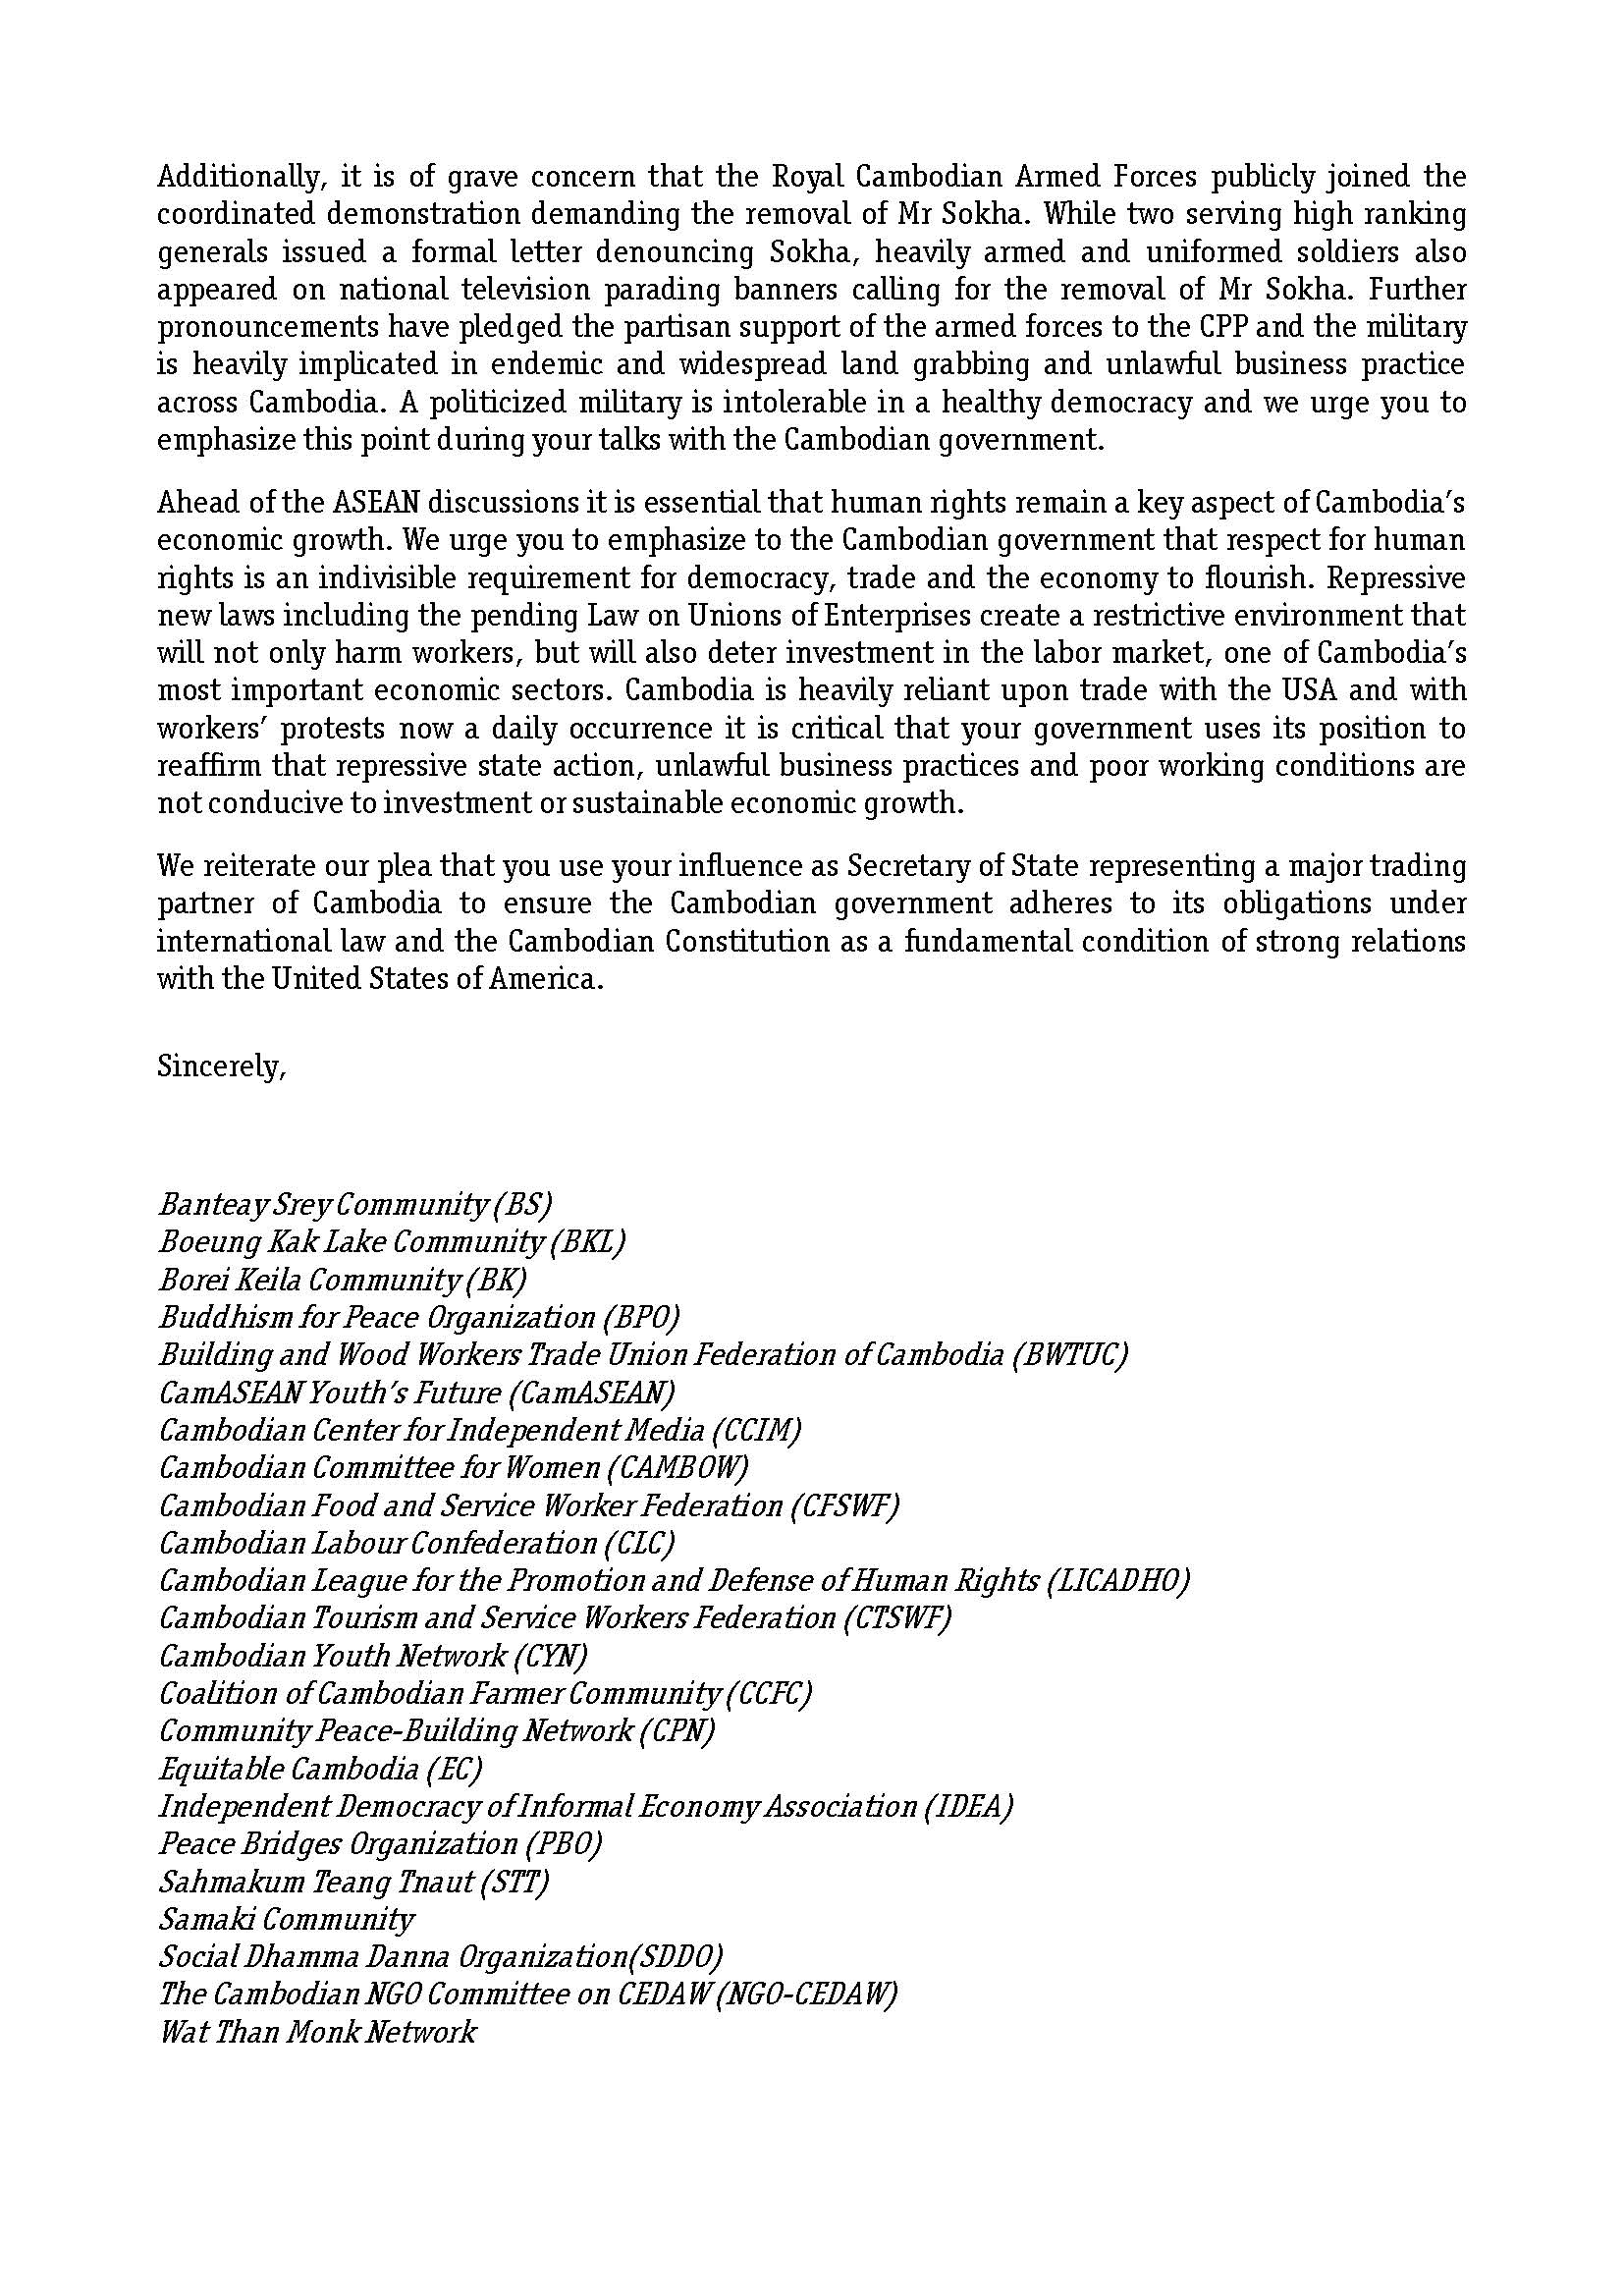 Kerry Phnom Penh letter endorsed by Union_Community and NGO_Page_2